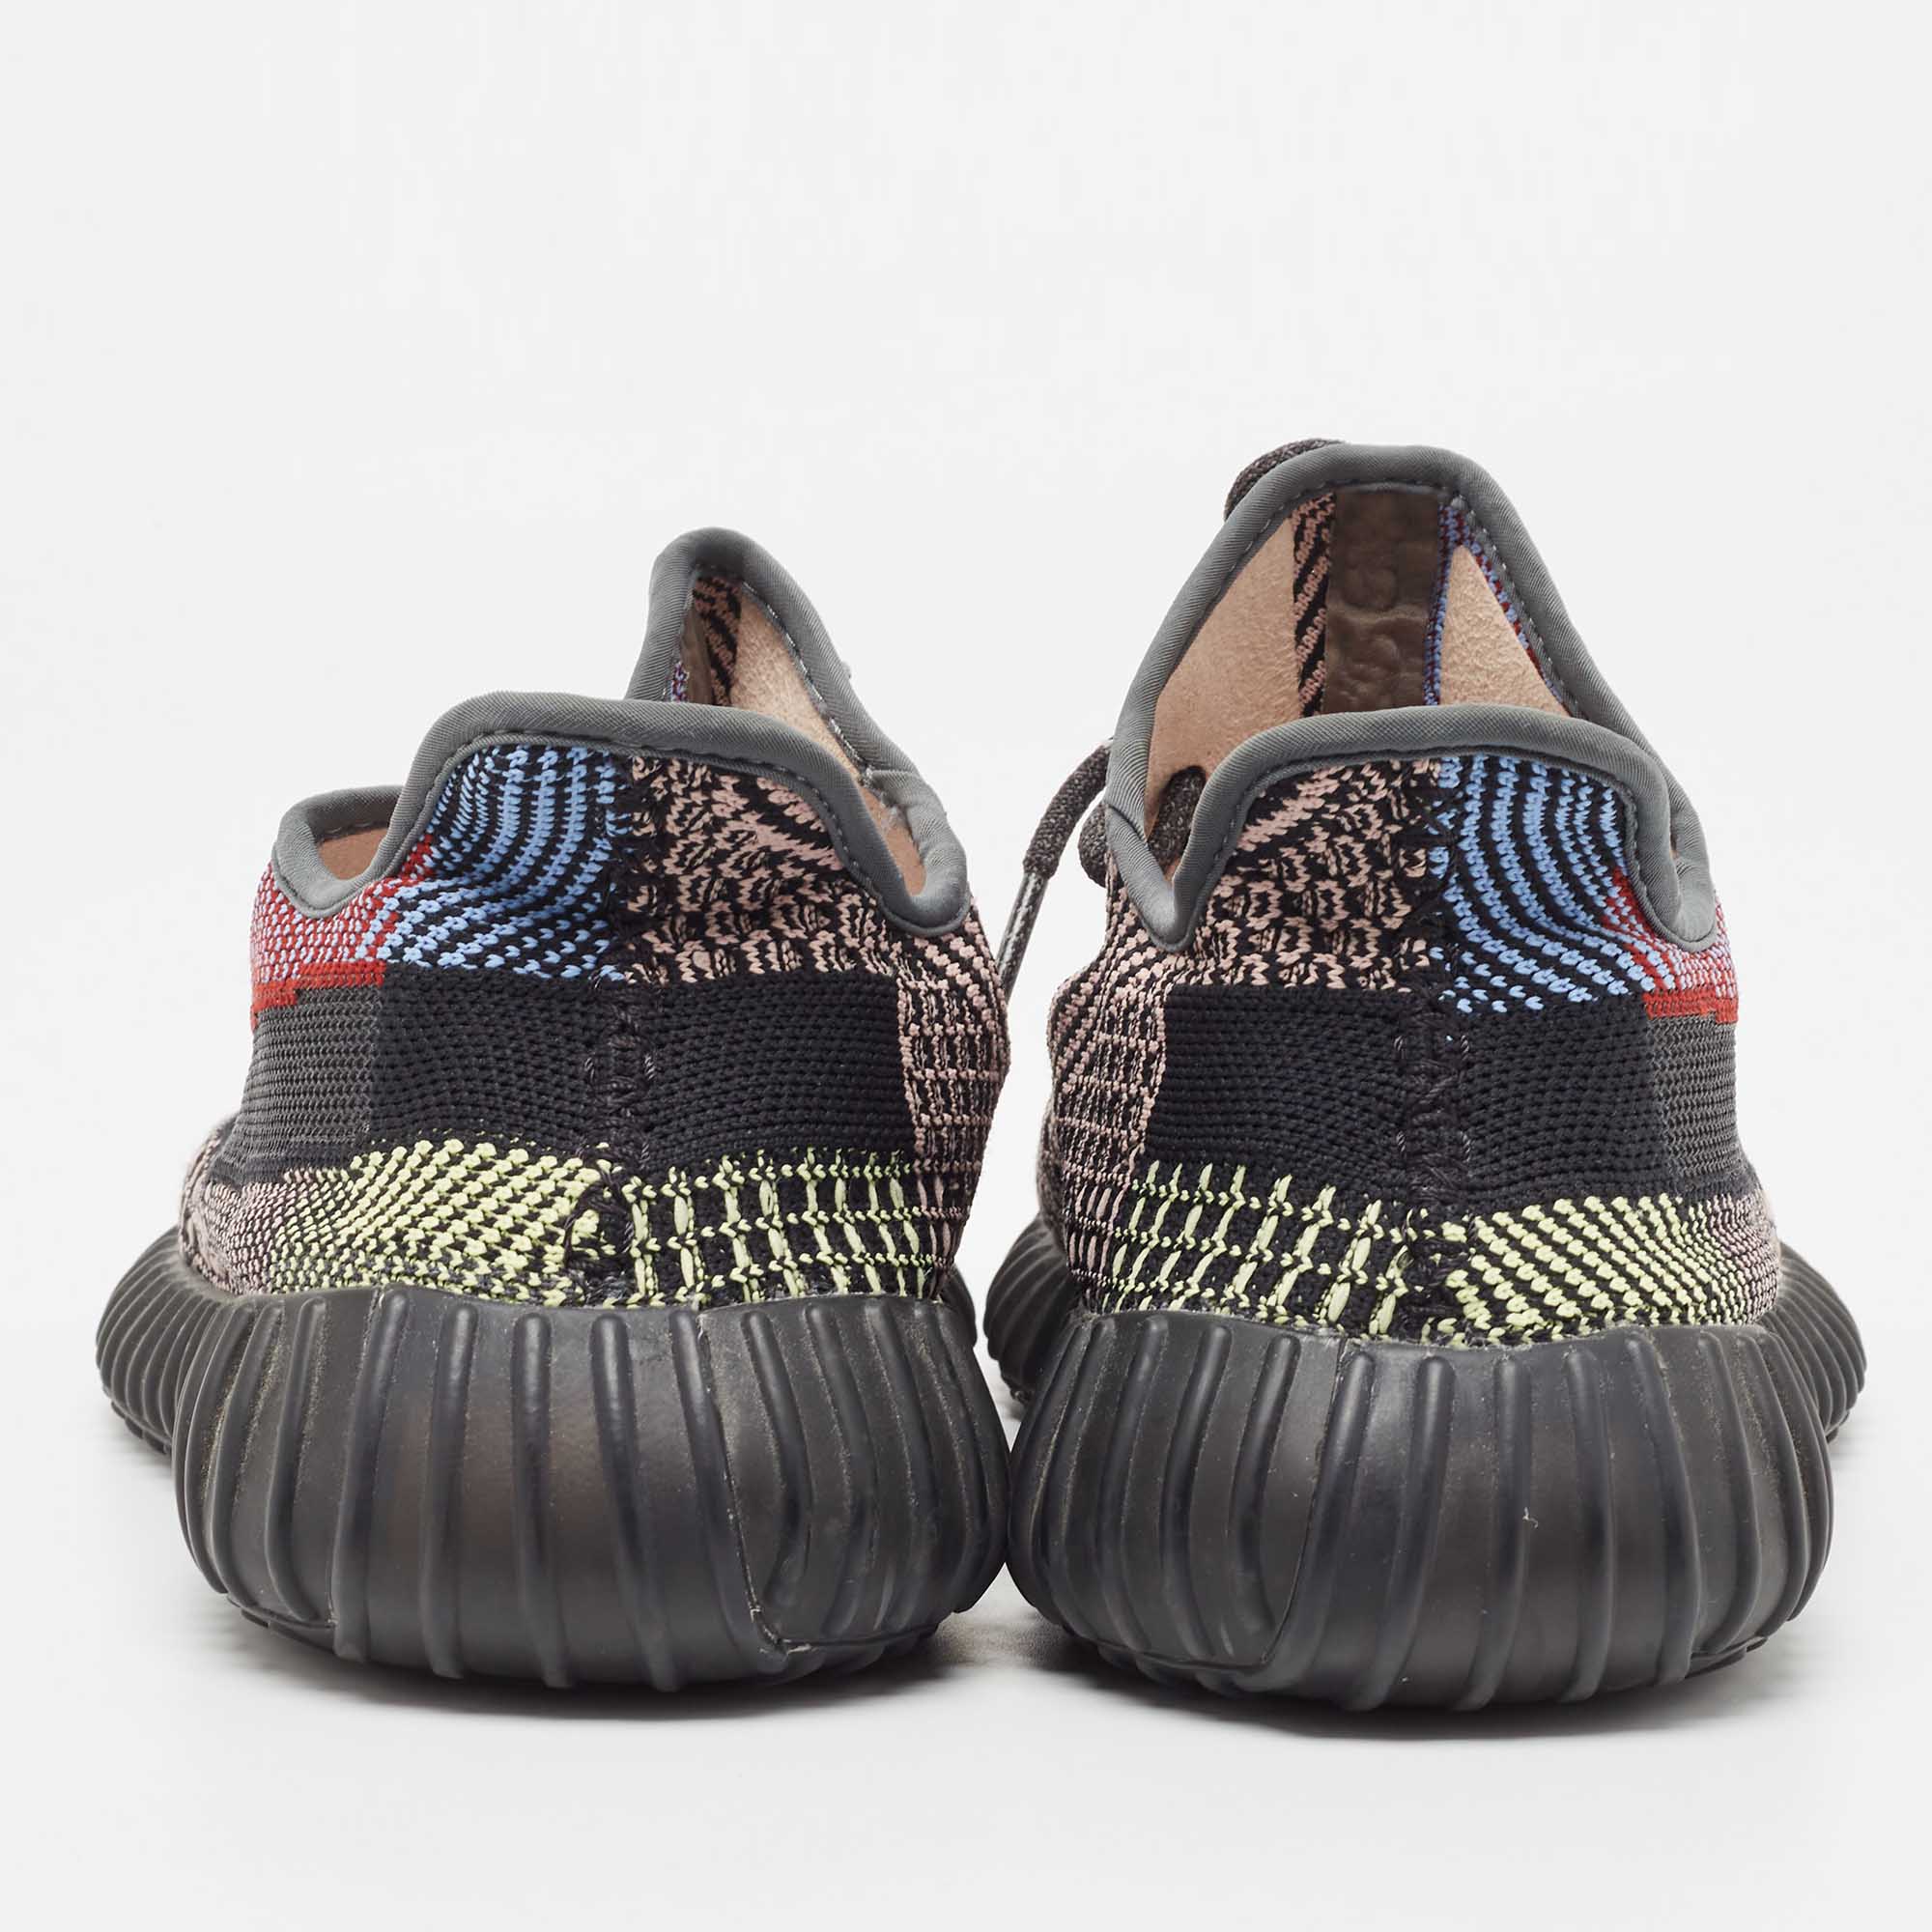 Adidas X Yeezy Multicolor Knit Fabric Boost-350-v2-yecheil Sneakers Size 43 1/3